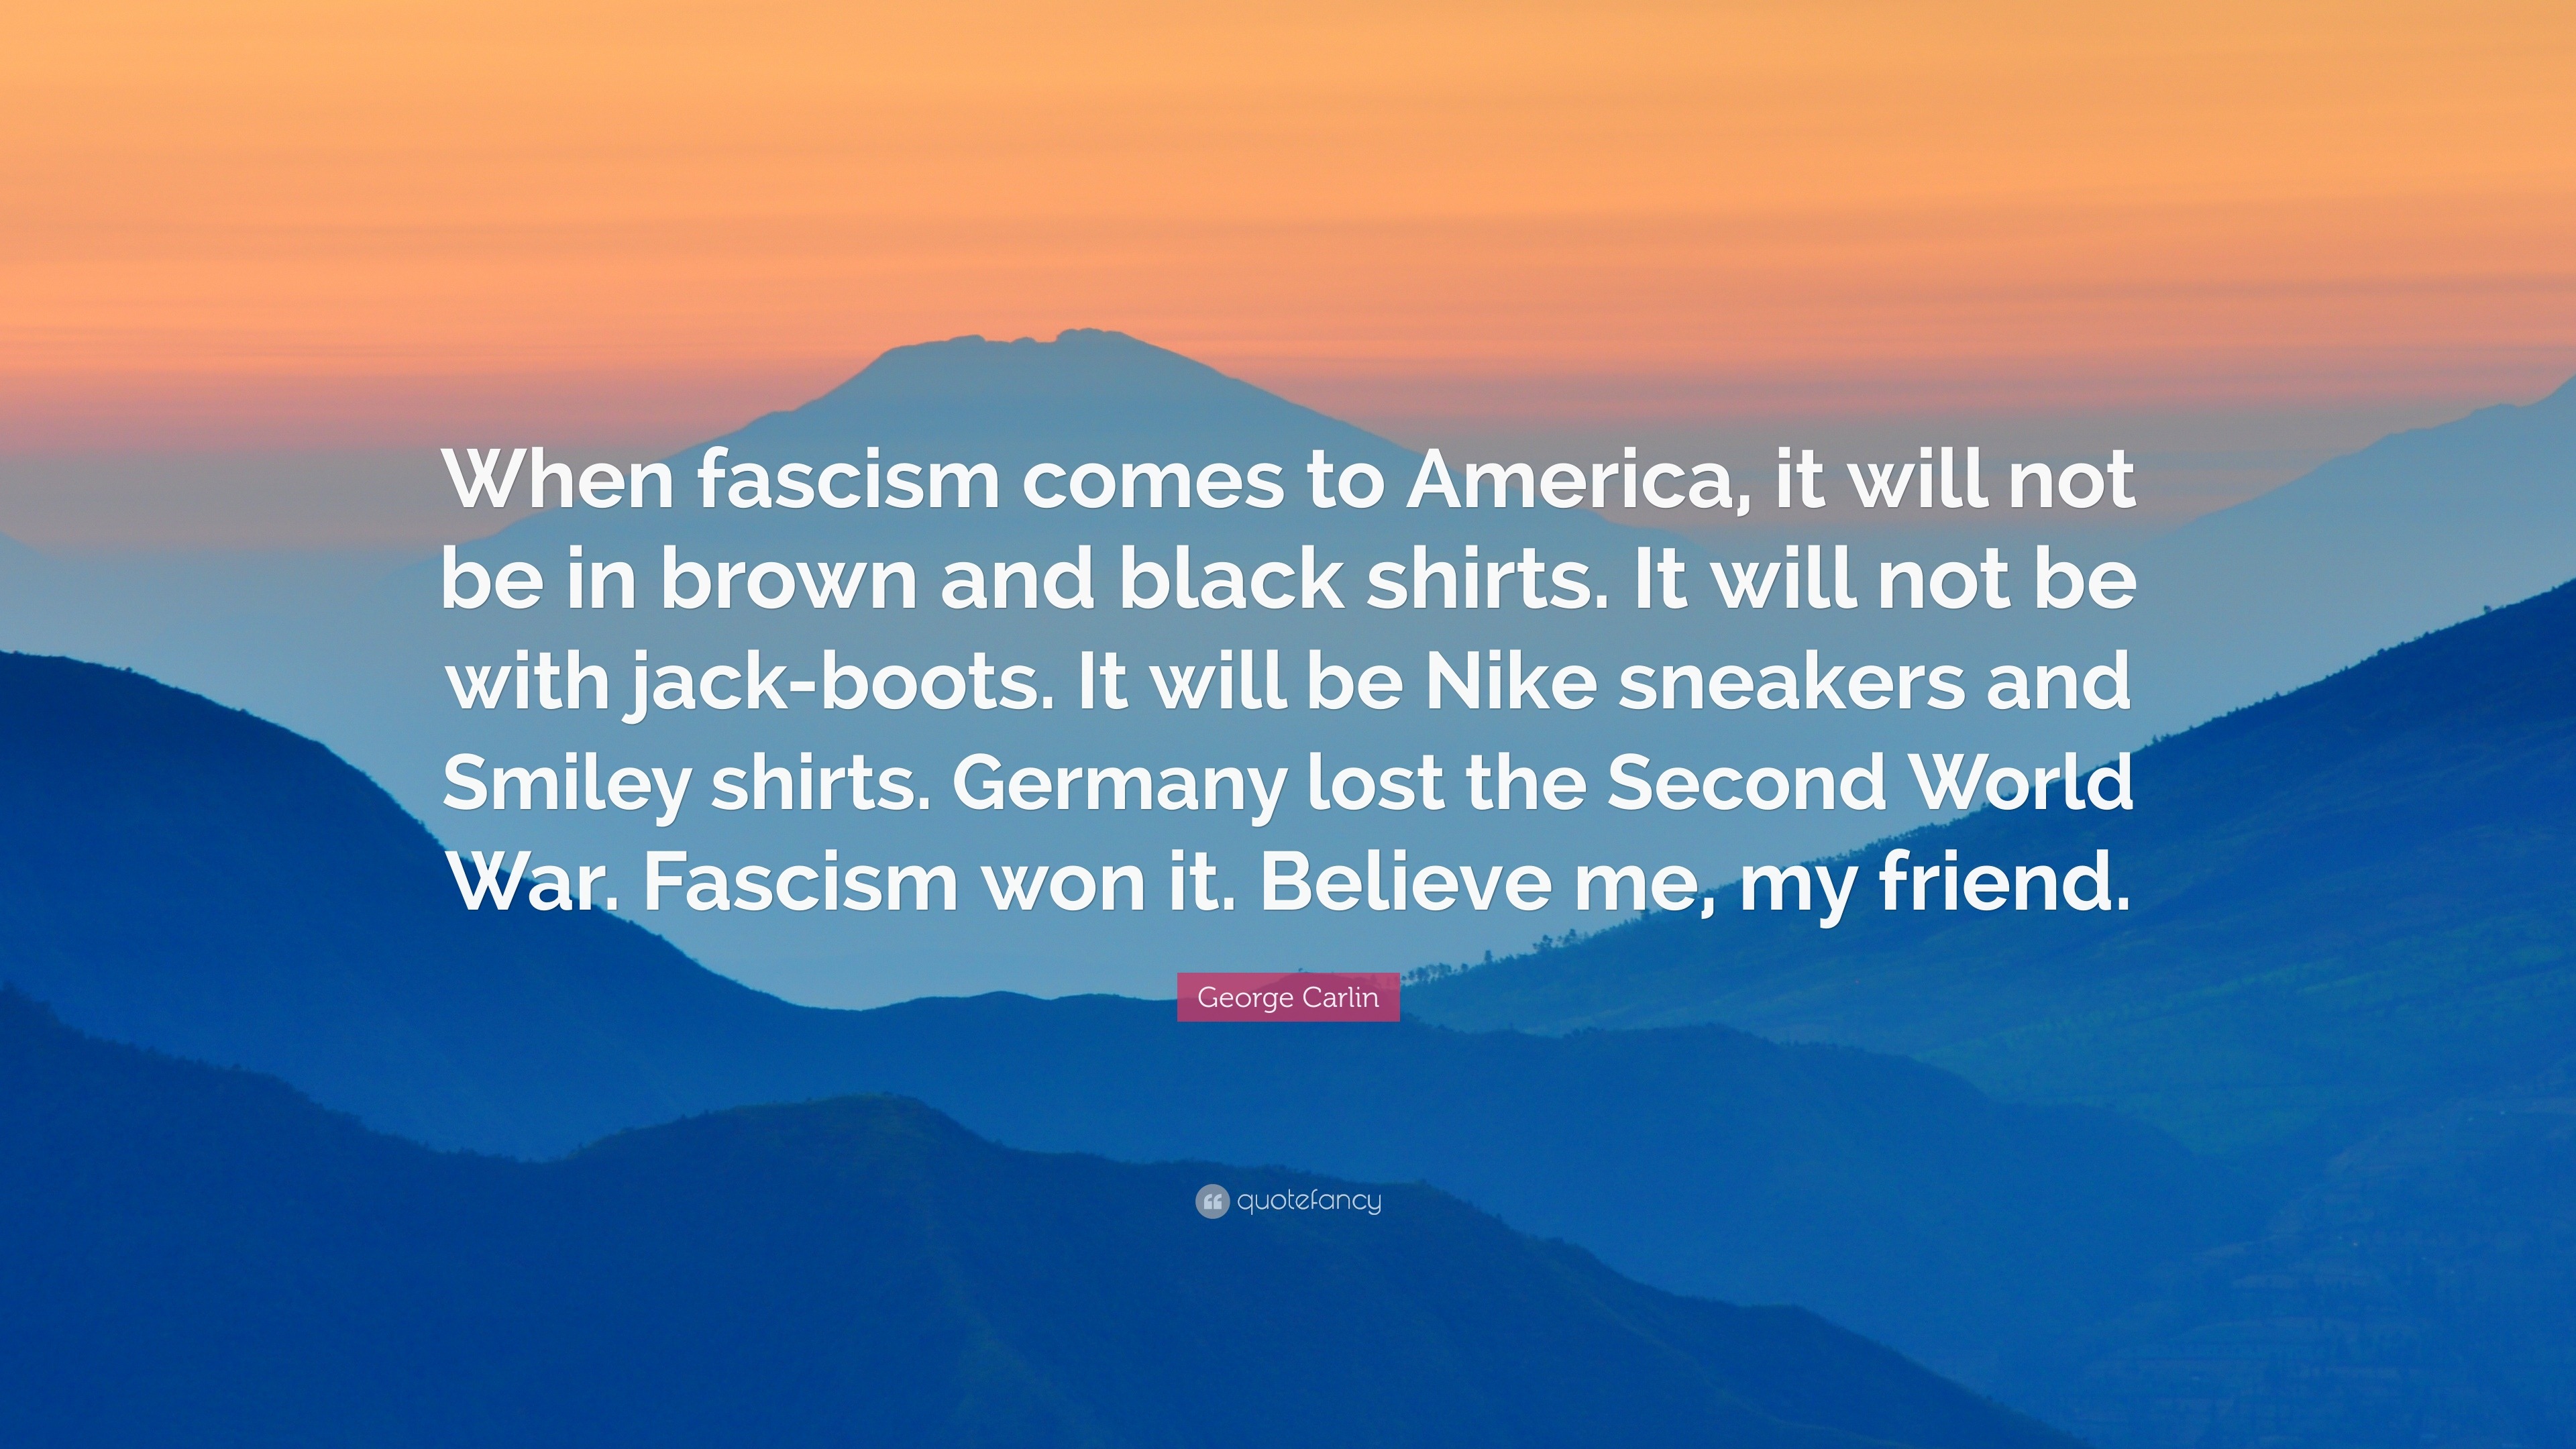 George Carlin Quote: “When fascism comes to America, it will not be in